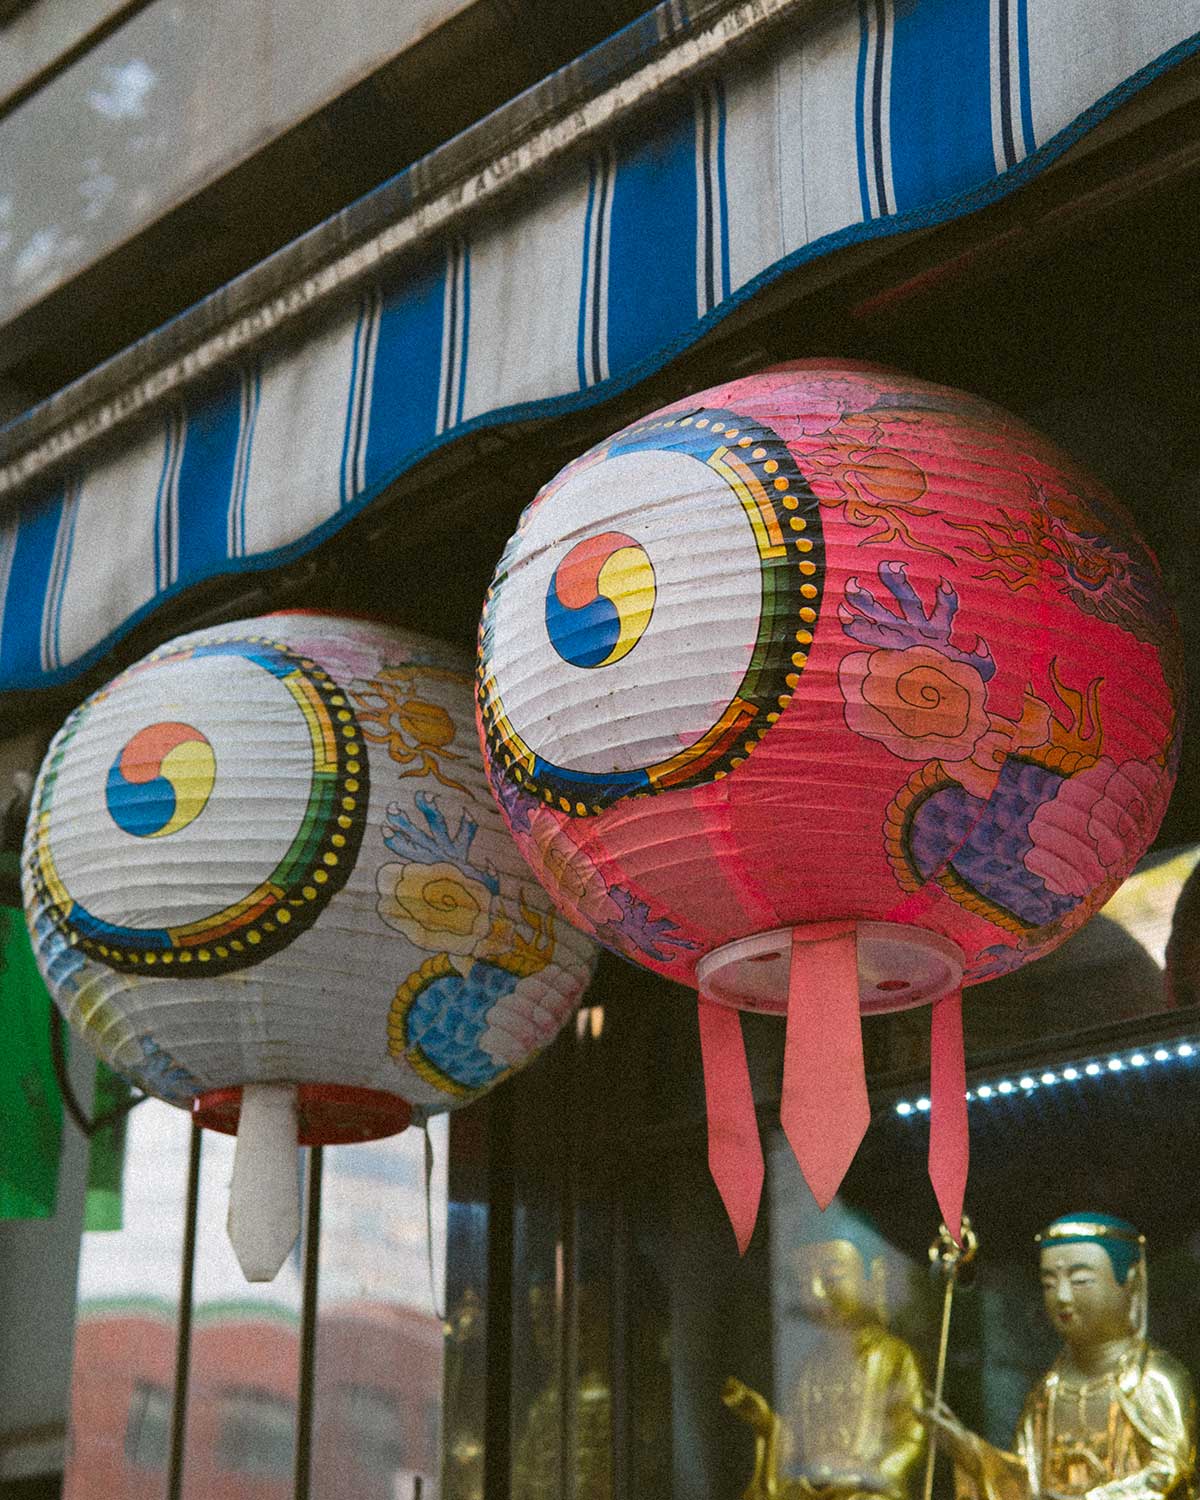 Korean decorations in the streets of Seoul